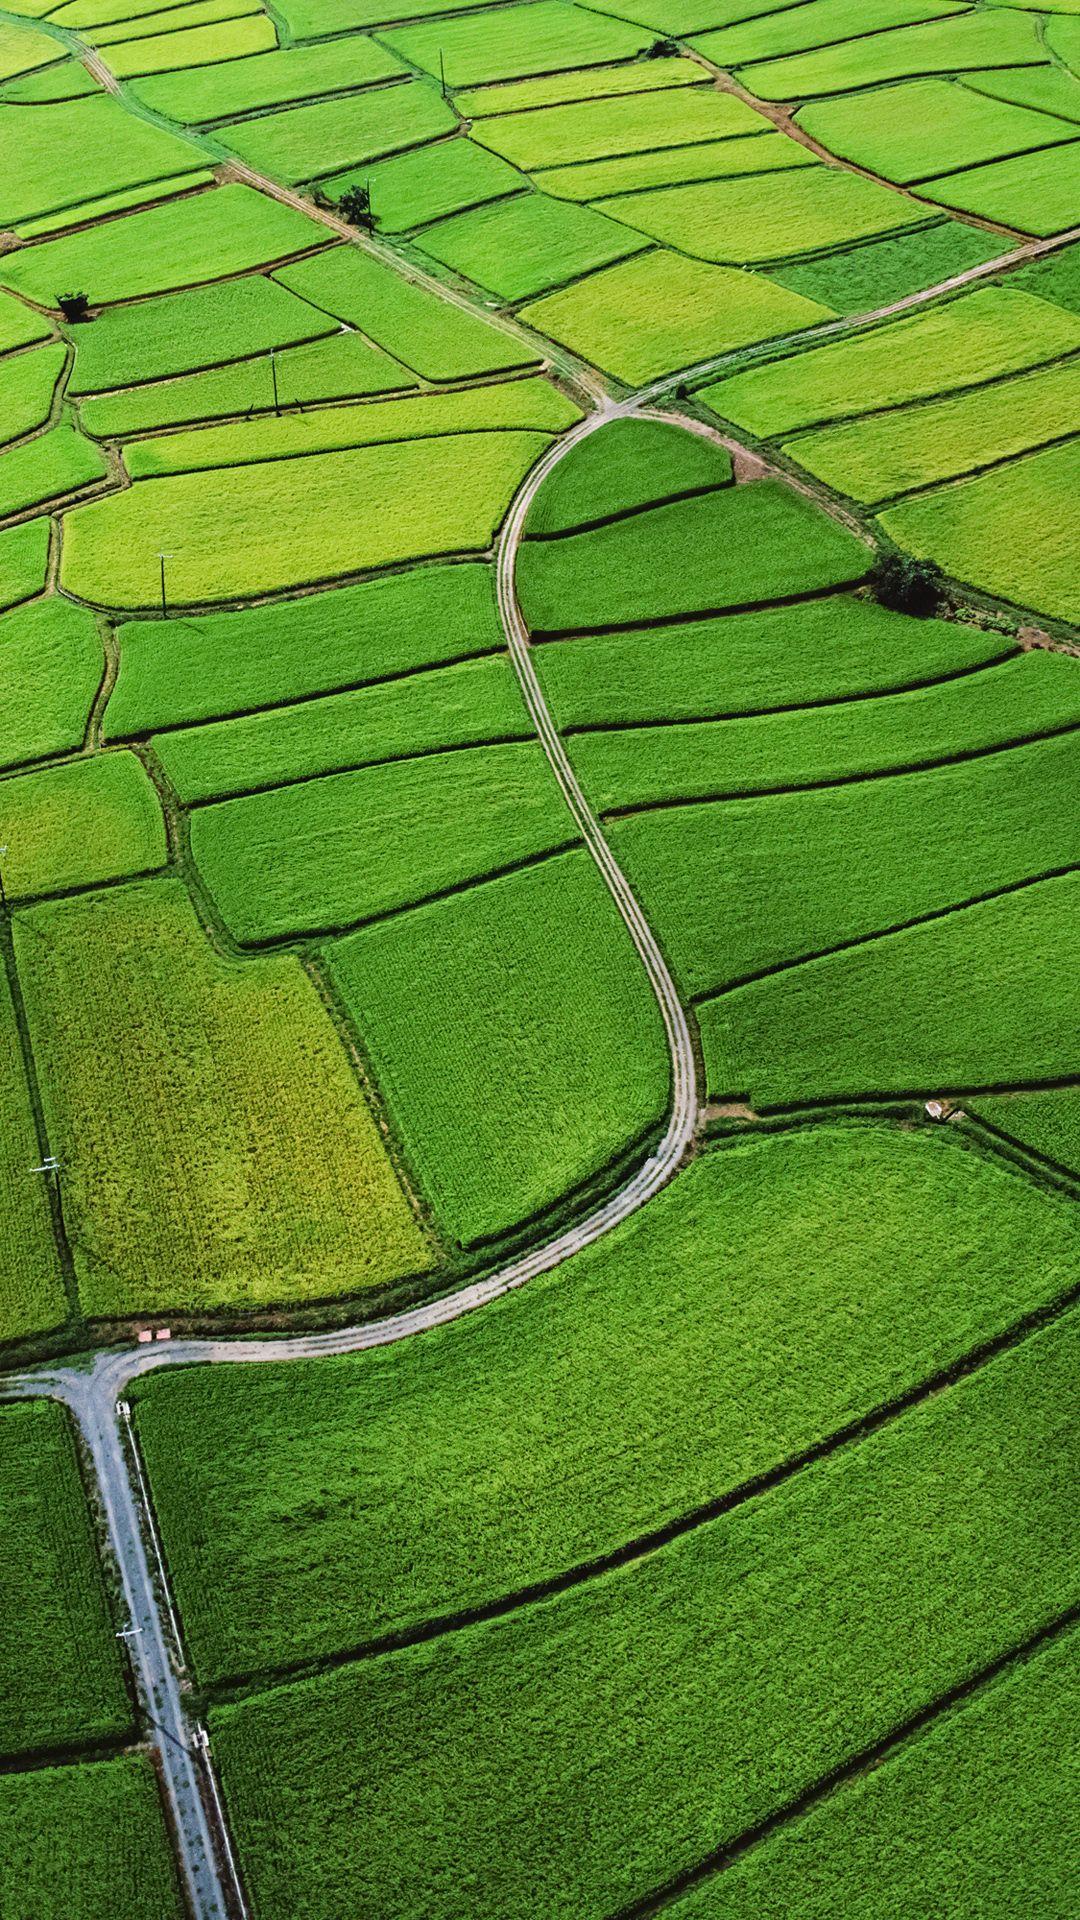 14,323 Paddy Field Wallpaper Images, Stock Photos & Vectors | Shutterstock